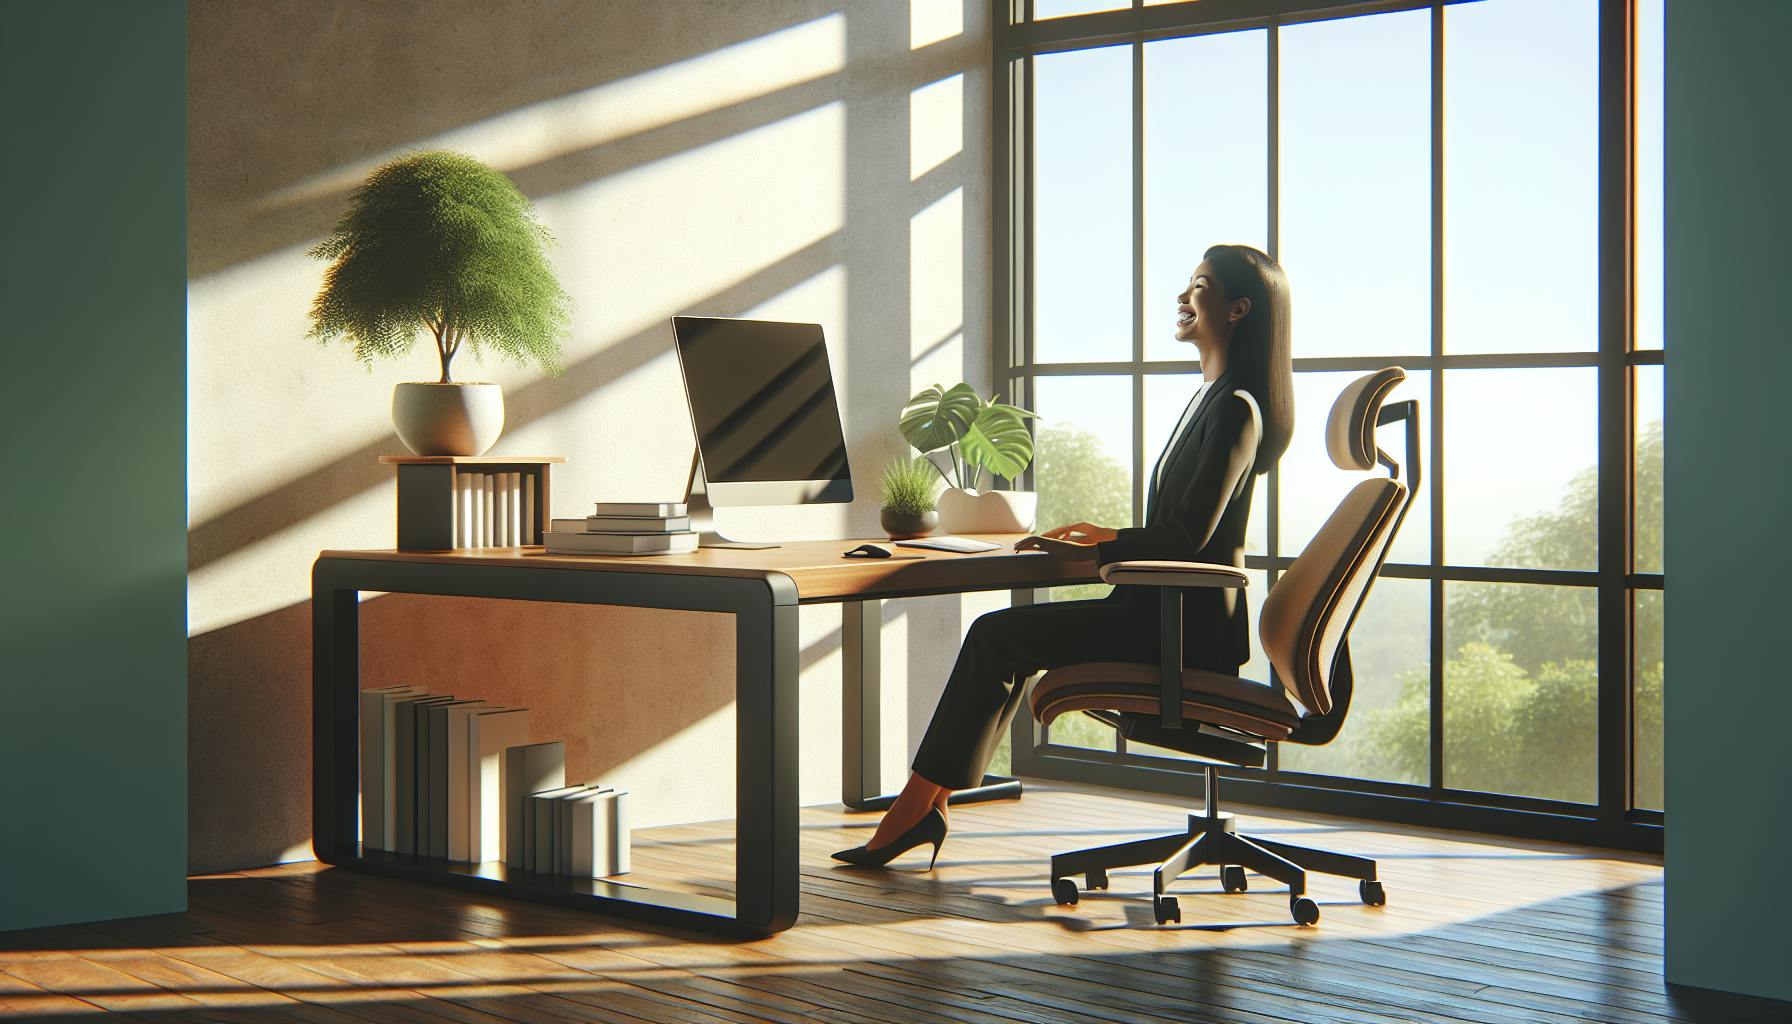 Becoming Happy Lawyer: Crafting an Ergonomic Workspace